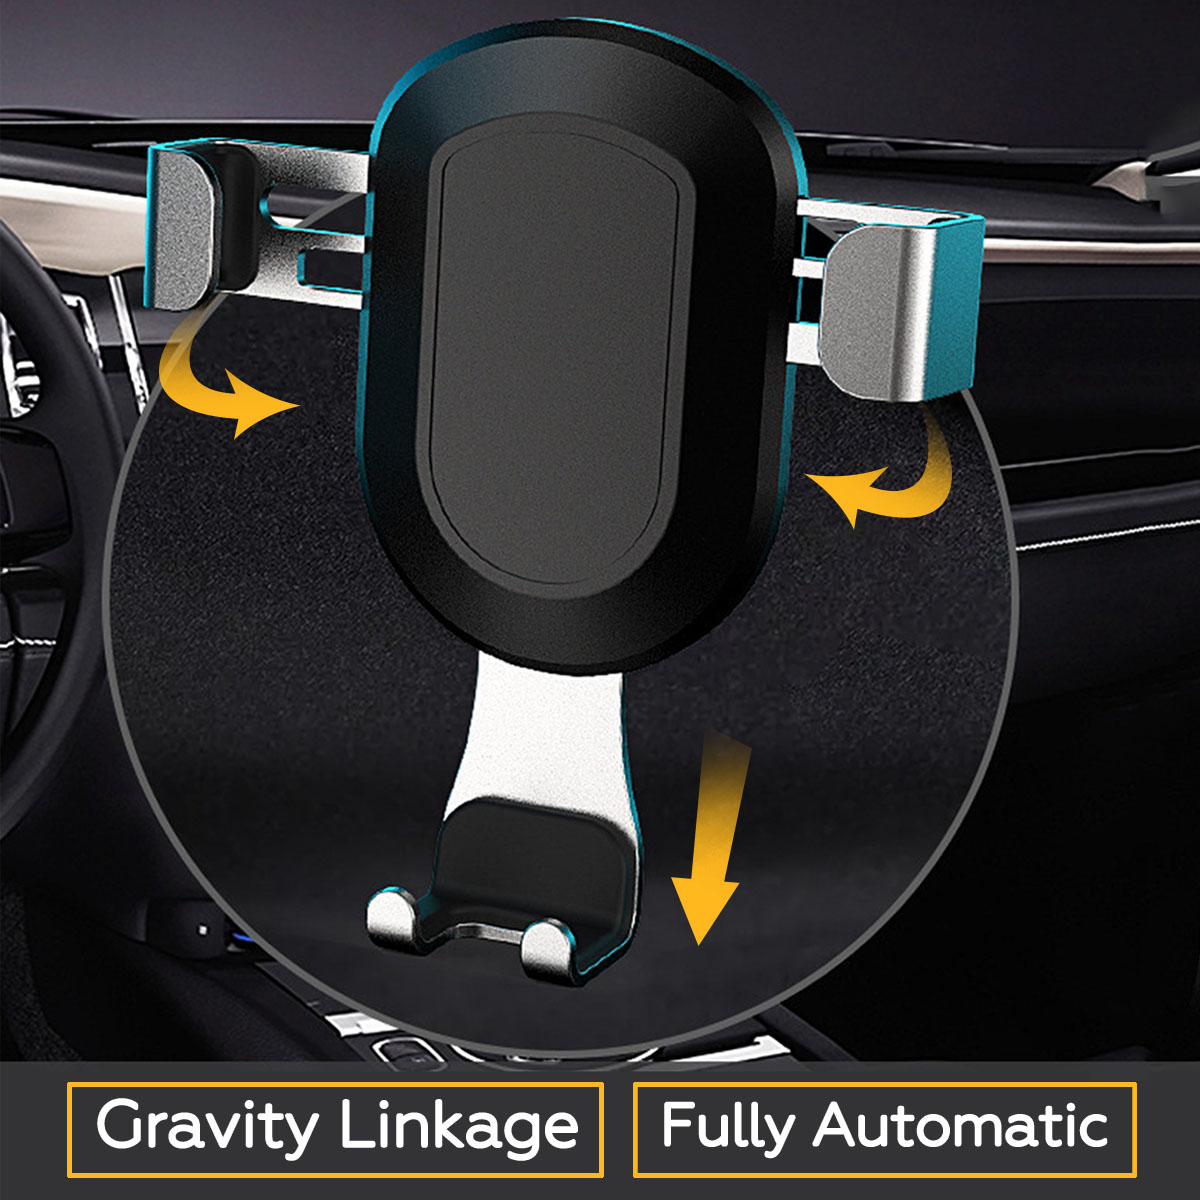 Universal-Gravity-Linkage-Automatical-Lock-Car-Mount-Air-Vent-Holder-for-Mobile-Phone-1389798-2